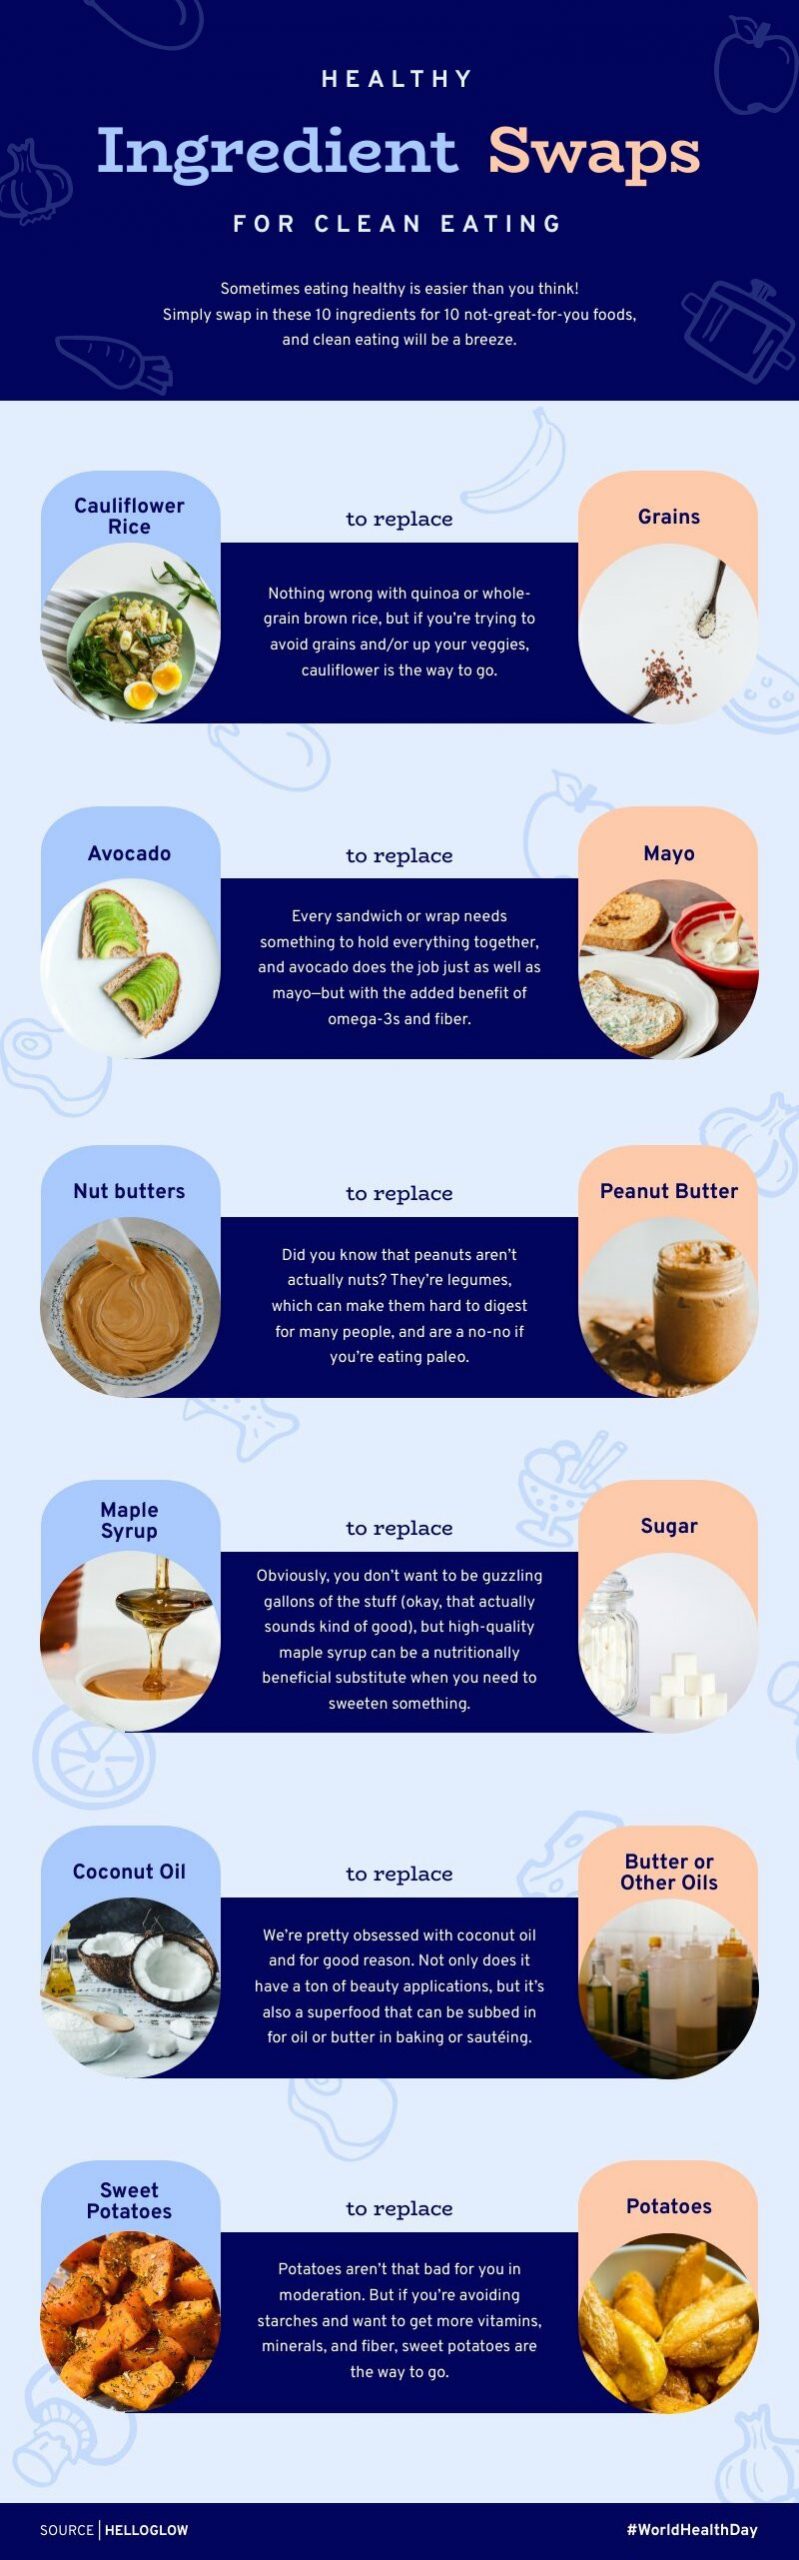 an infographic about healthy ingredient swaps